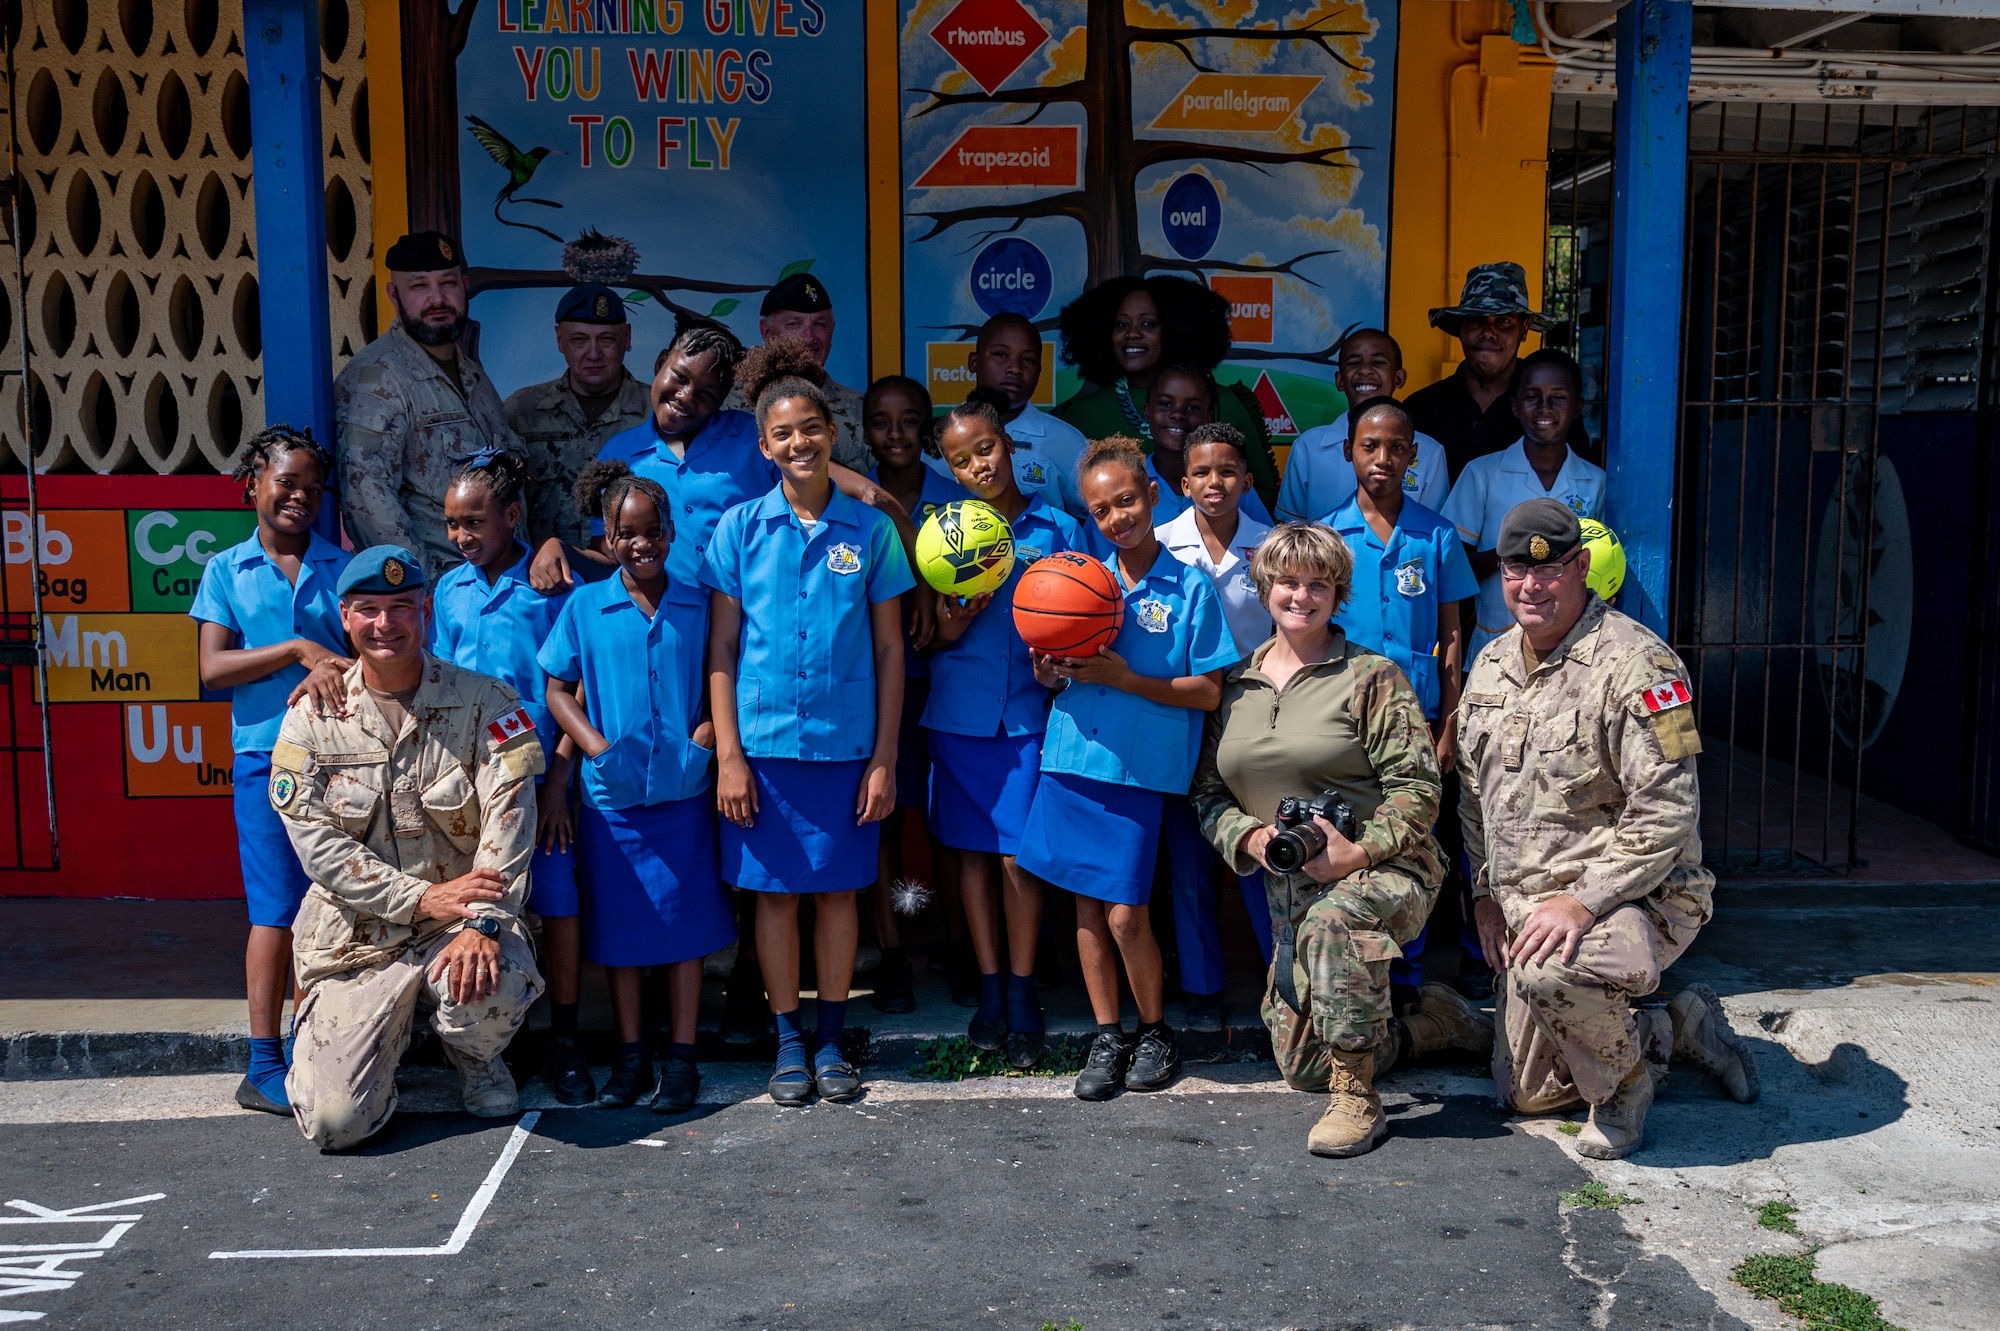 U.S. Air Force and Canadian Armed Forces smile for a photo at the Port Royal Primary and Infant School in Port Royal Jamaica, Feb. 27, 2023. During Operation Forward Tiger, an Airman from the 23rd Air Expeditionary Wing teamed with Canadian Armed Forces to visit the children who attend the school to donate recreational equipment and discuss the importance of education and values. (U.S. Air Force photo by Airman 1st Class Courtney Sebastianelli)